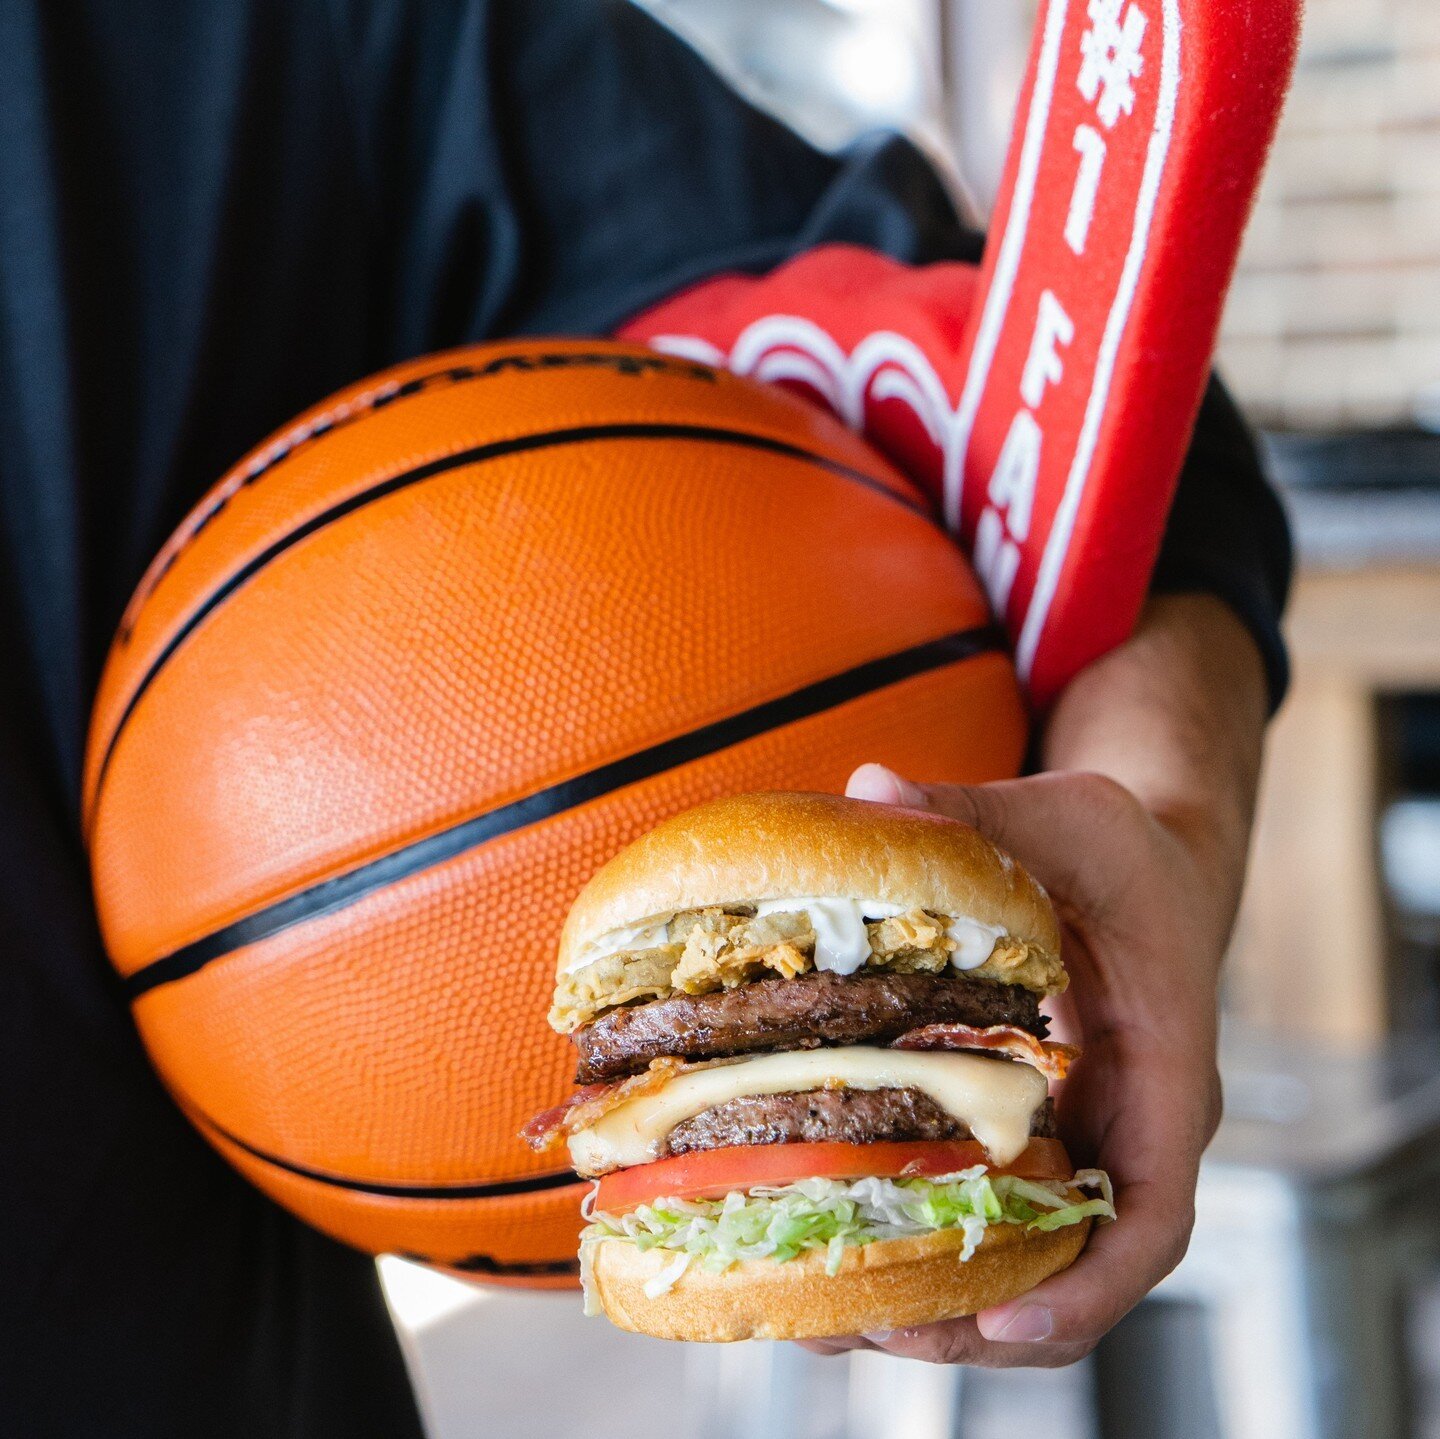 Don't miss your shot on FREE delivery! This Sunday only, get free delivery when you order from buffalos.com so you don't have to miss a moment of the action. 🏀

Valid on delivery orders only via Buffalo's Cafe online ordering site. Valid 3/27/22 onl